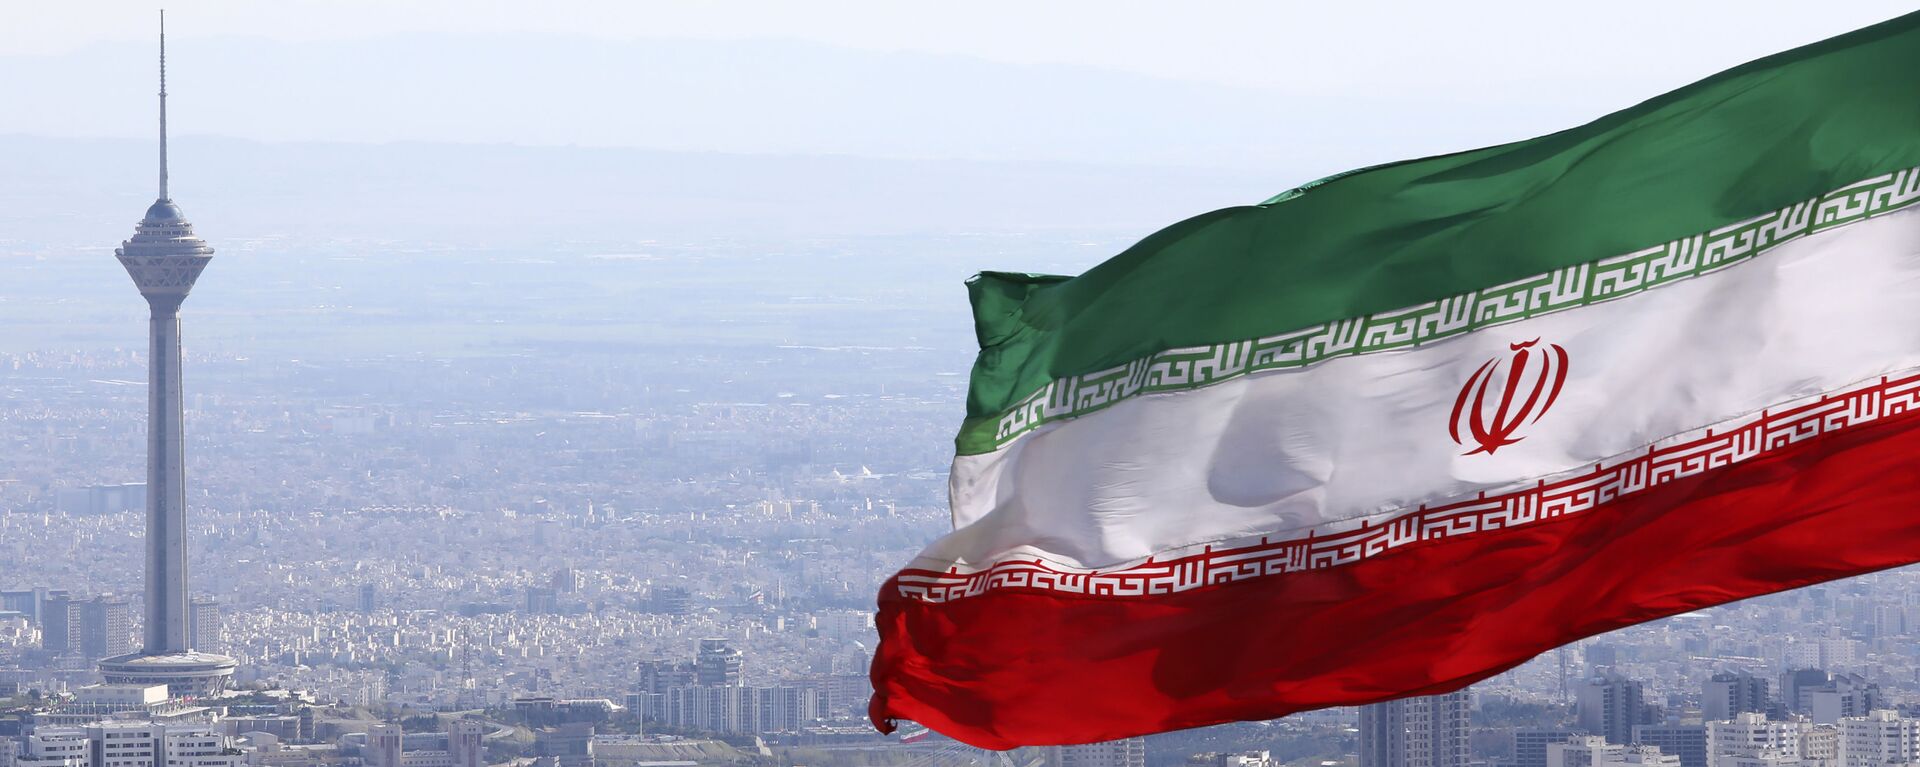  In this March 31, 2020, file photo, Iran's national flag waves as Milad telecommunications tower and buildings are seen in Tehran, Iran - Sputnik International, 1920, 02.02.2021